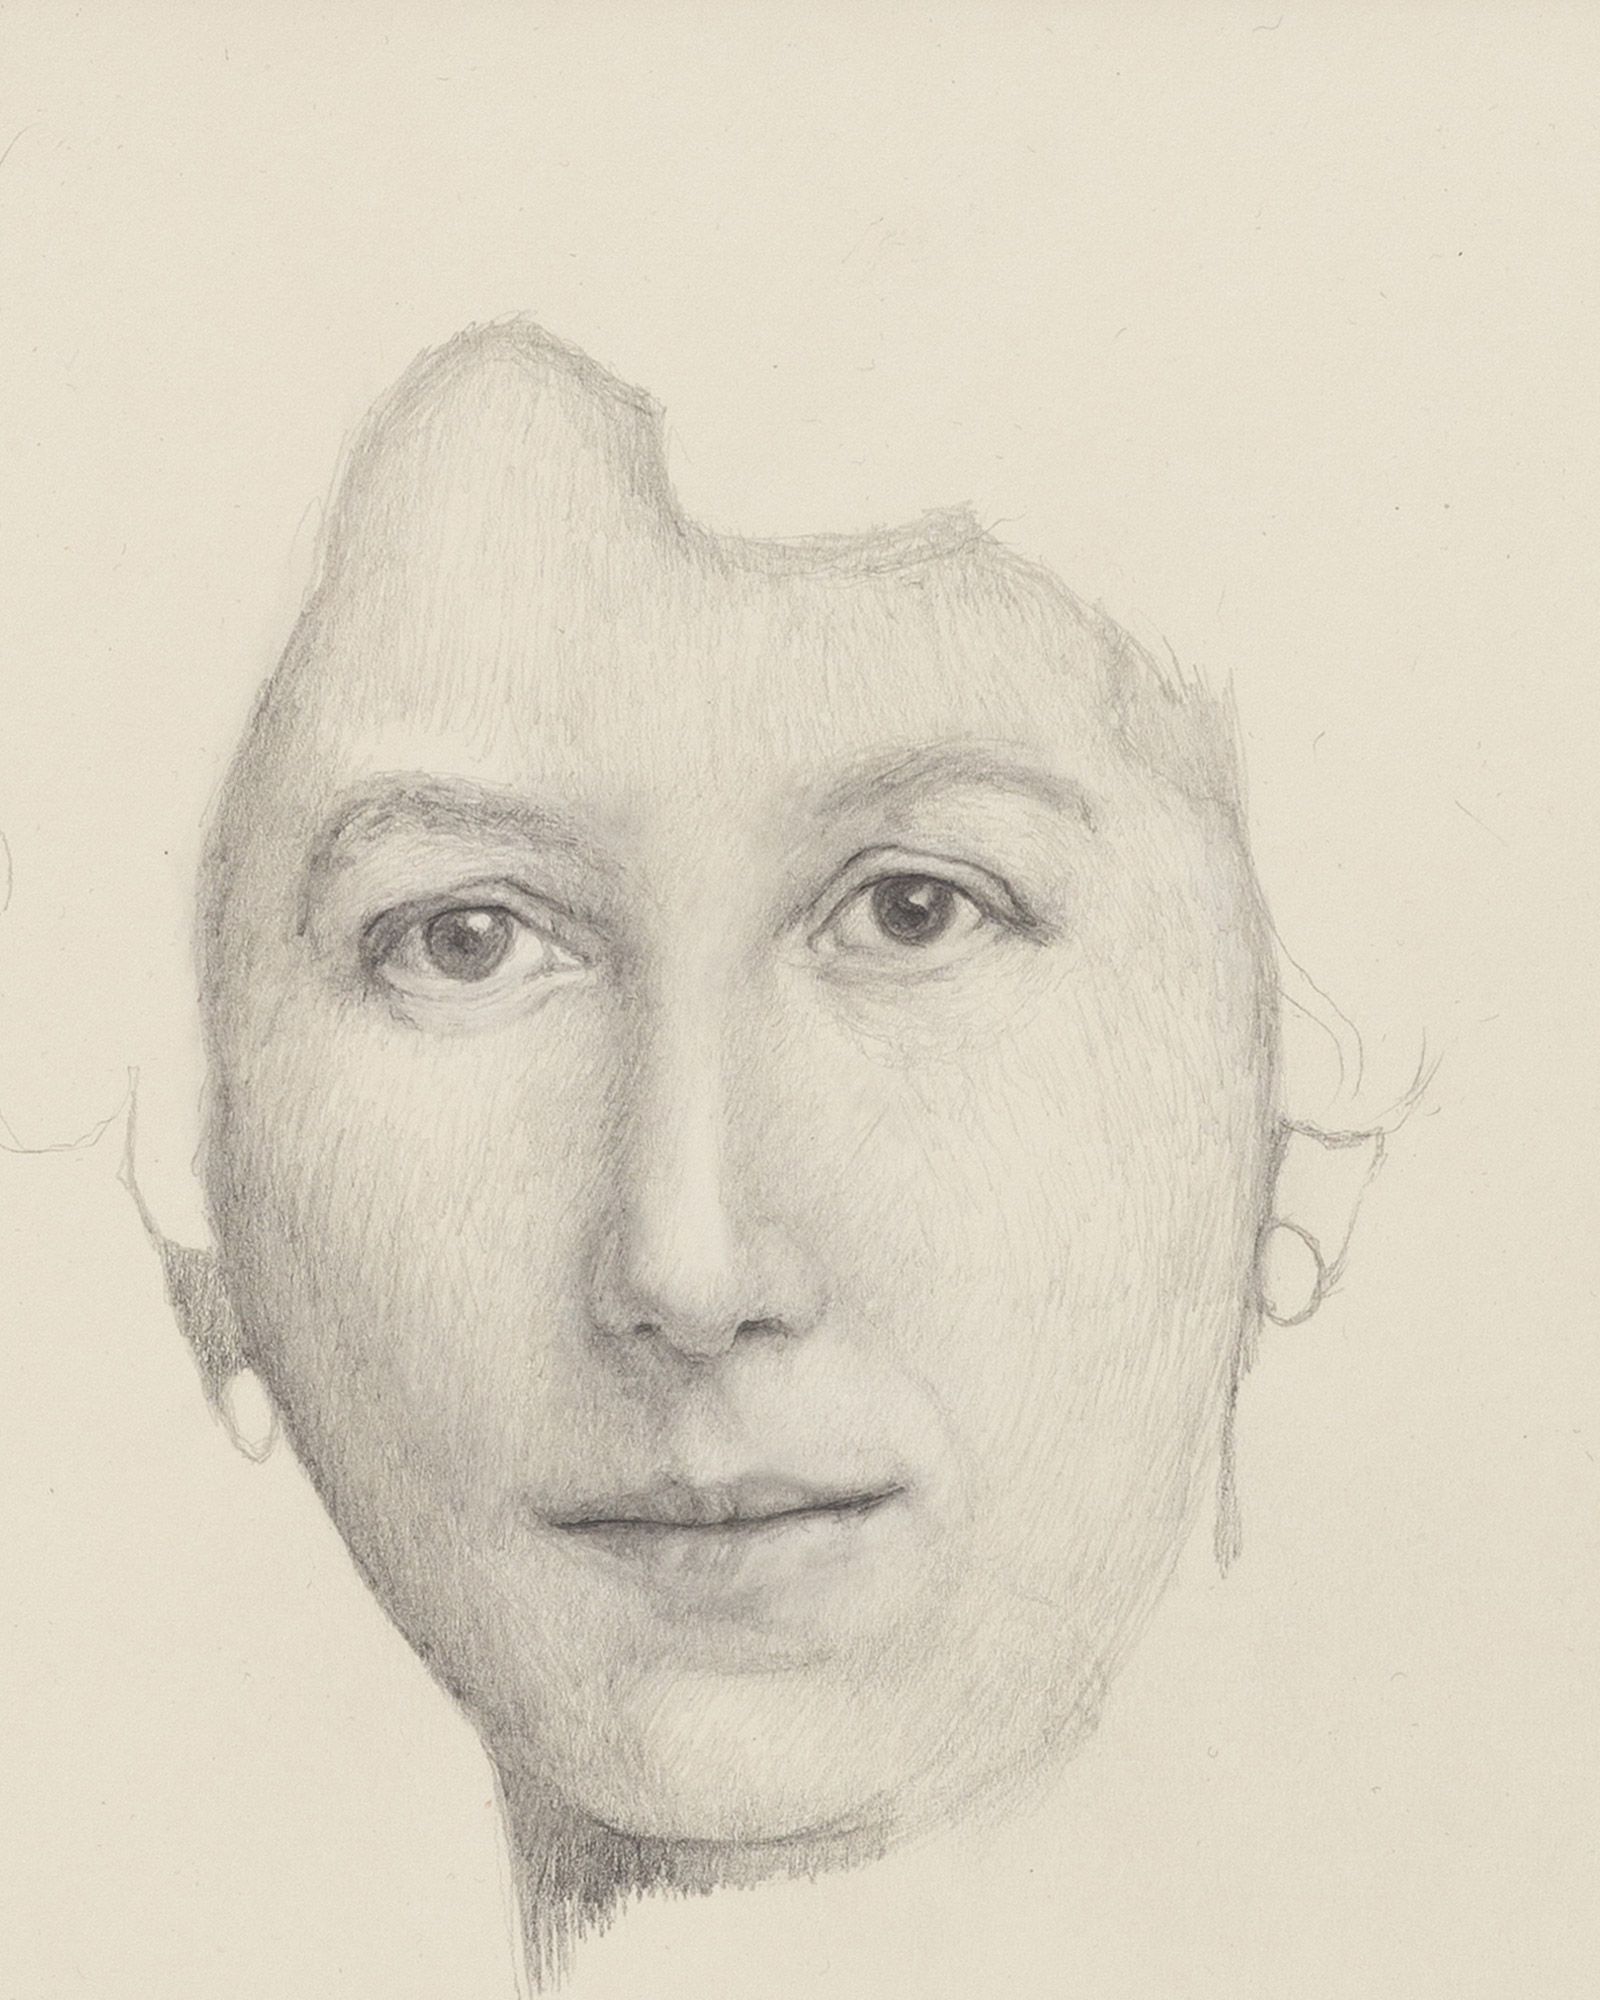 Detailed pencil sketch of a woman's partial face with expressive eyes and soft features.